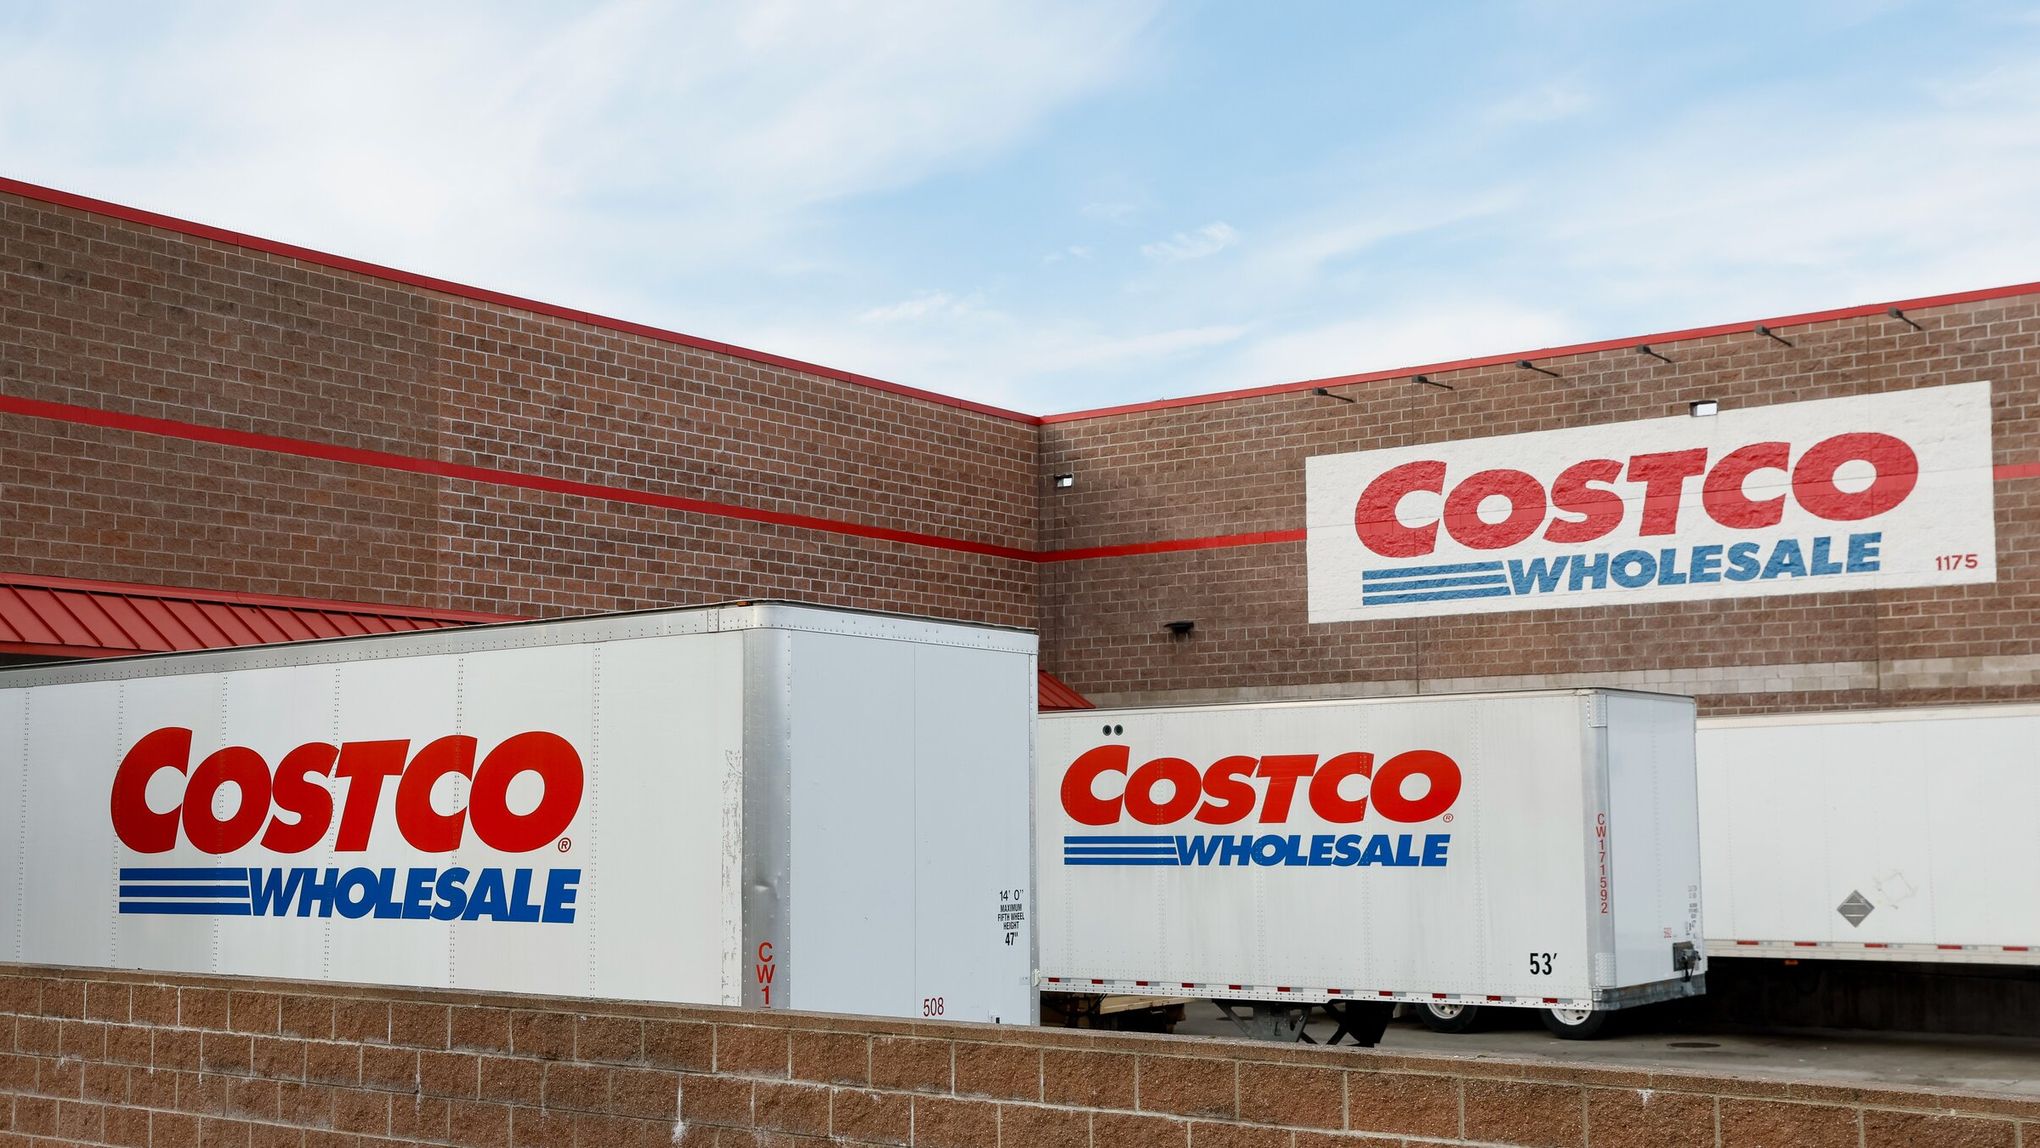 Passion for Costco stands the test of shaky economy. Will it last?